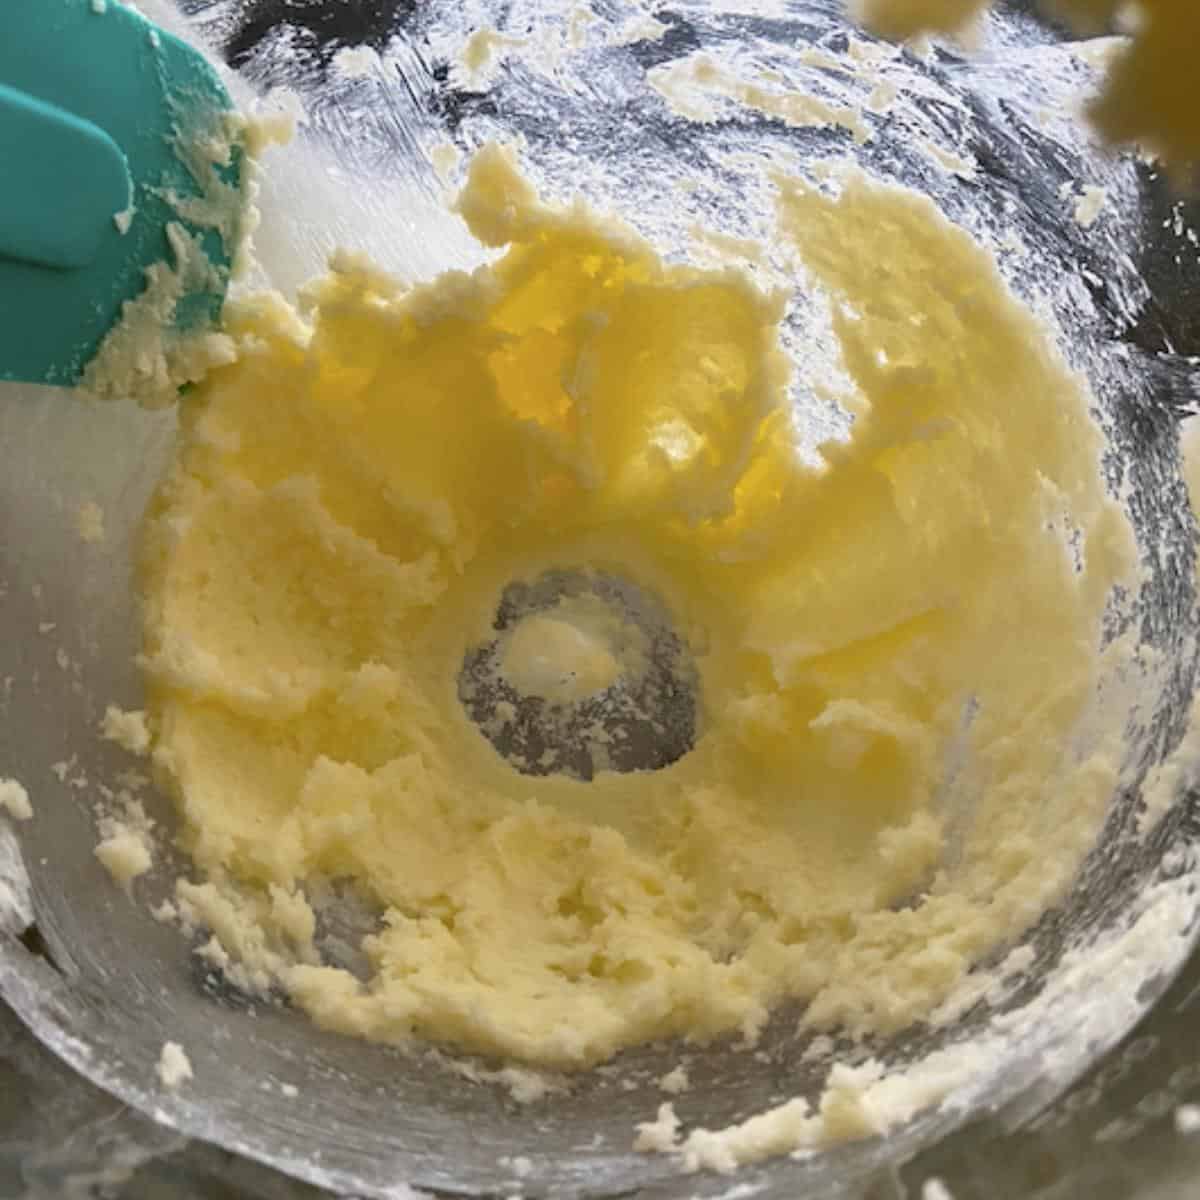 sugar and butter creamed together in glass bowl